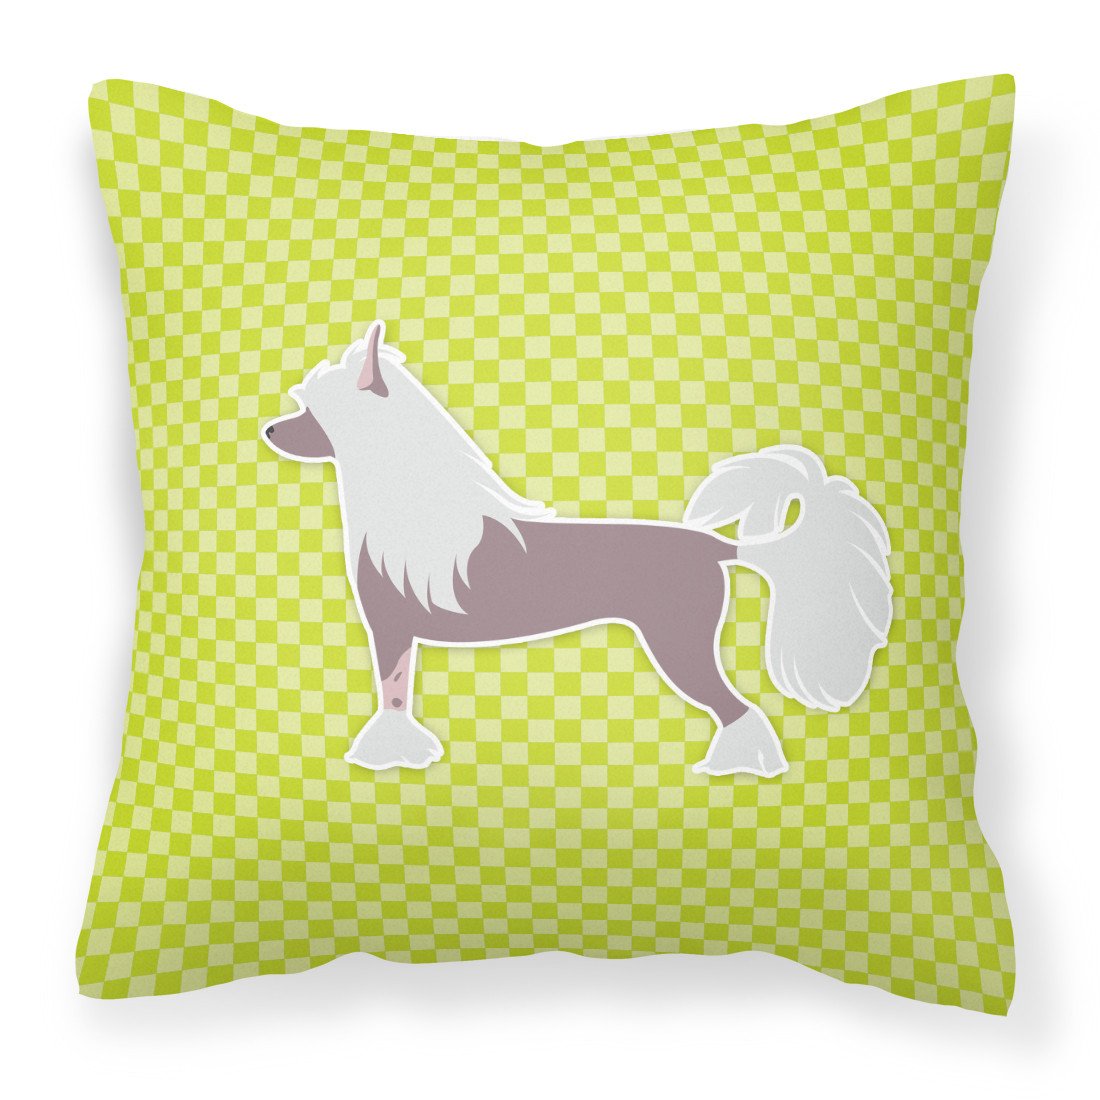 Chinese Crested Checkerboard Green Fabric Decorative Pillow BB3843PW1818 by Caroline's Treasures